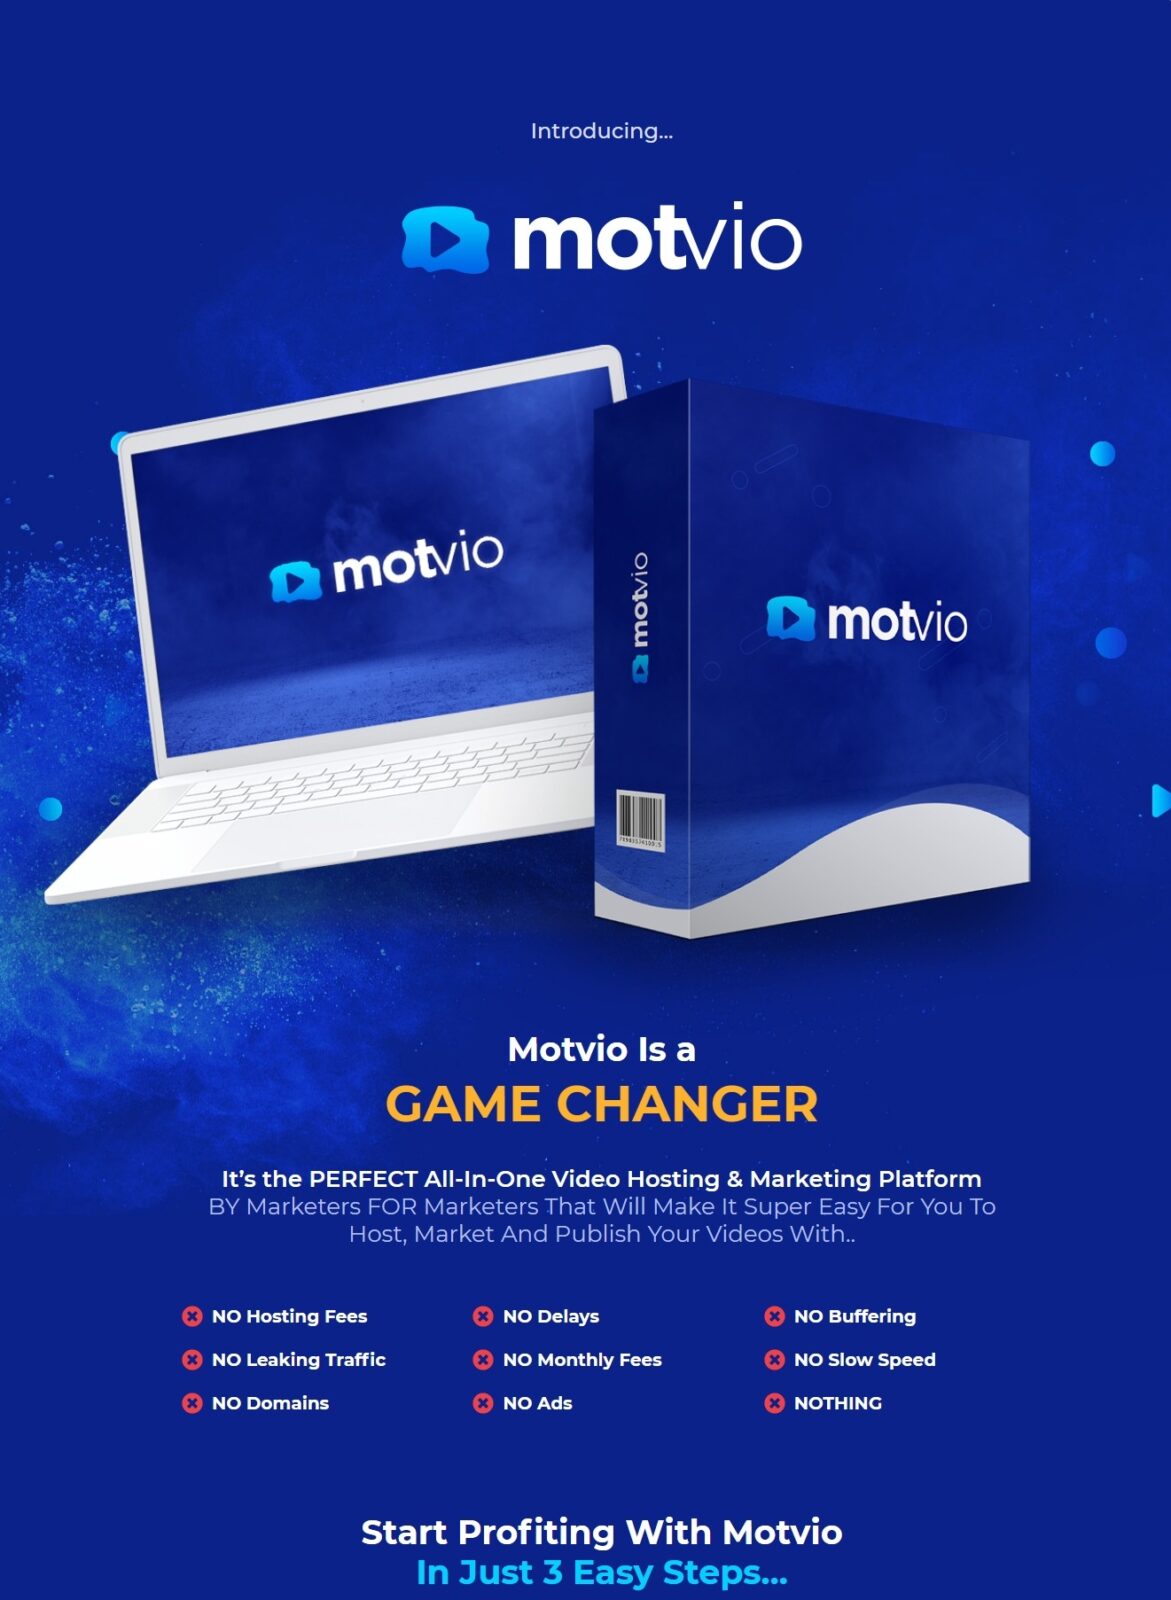 Motvio Review: Leverage Futuristic Video Marketing Technology To HOST, PLAY & MARKET Your Videos And Skyrocket Your Profits